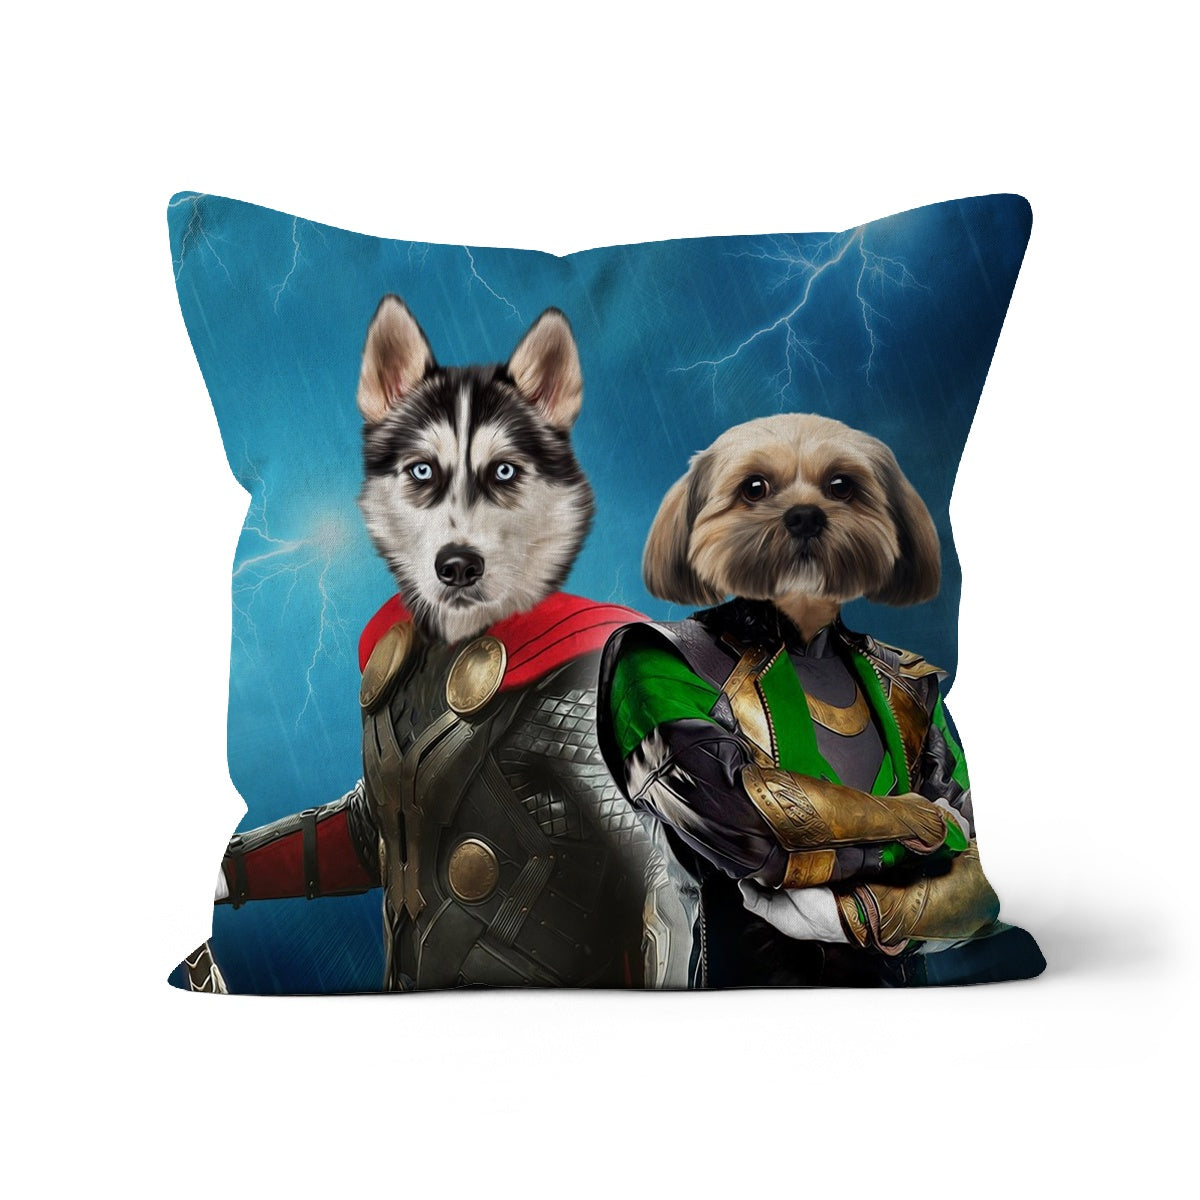 Thor & Loki: Custom Pet Pillow, Paw & Glory, paw and glory, personalised cat pillow, dog shaped pillows, custom pillow cover, pillows with dogs picture, my pet pillow